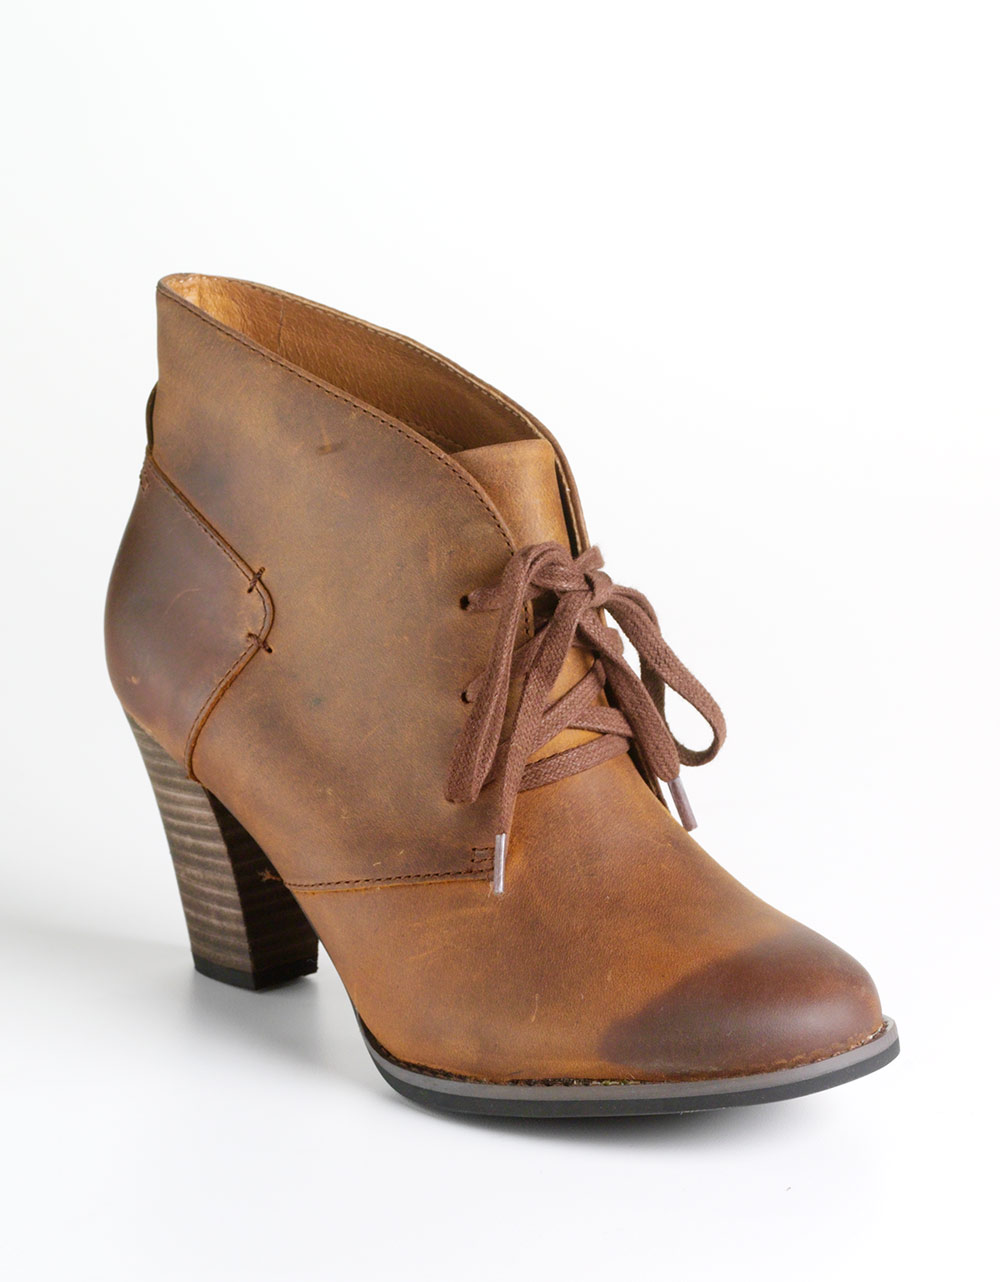 Lyst - Clarks Heath Wren Leather Ankle Boots in Brown